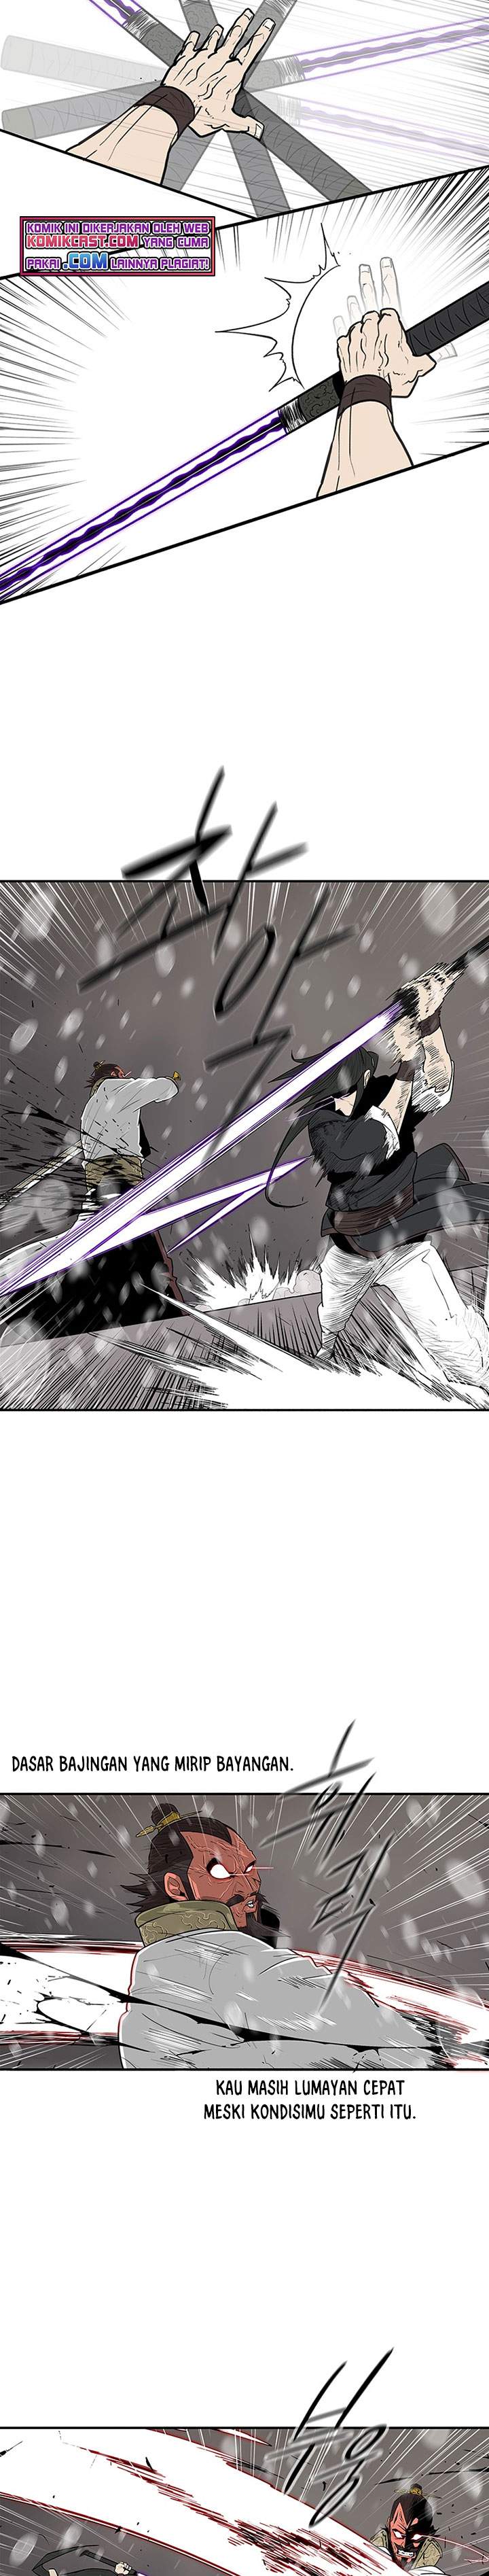 Legend of the Northern Blade Chapter 106